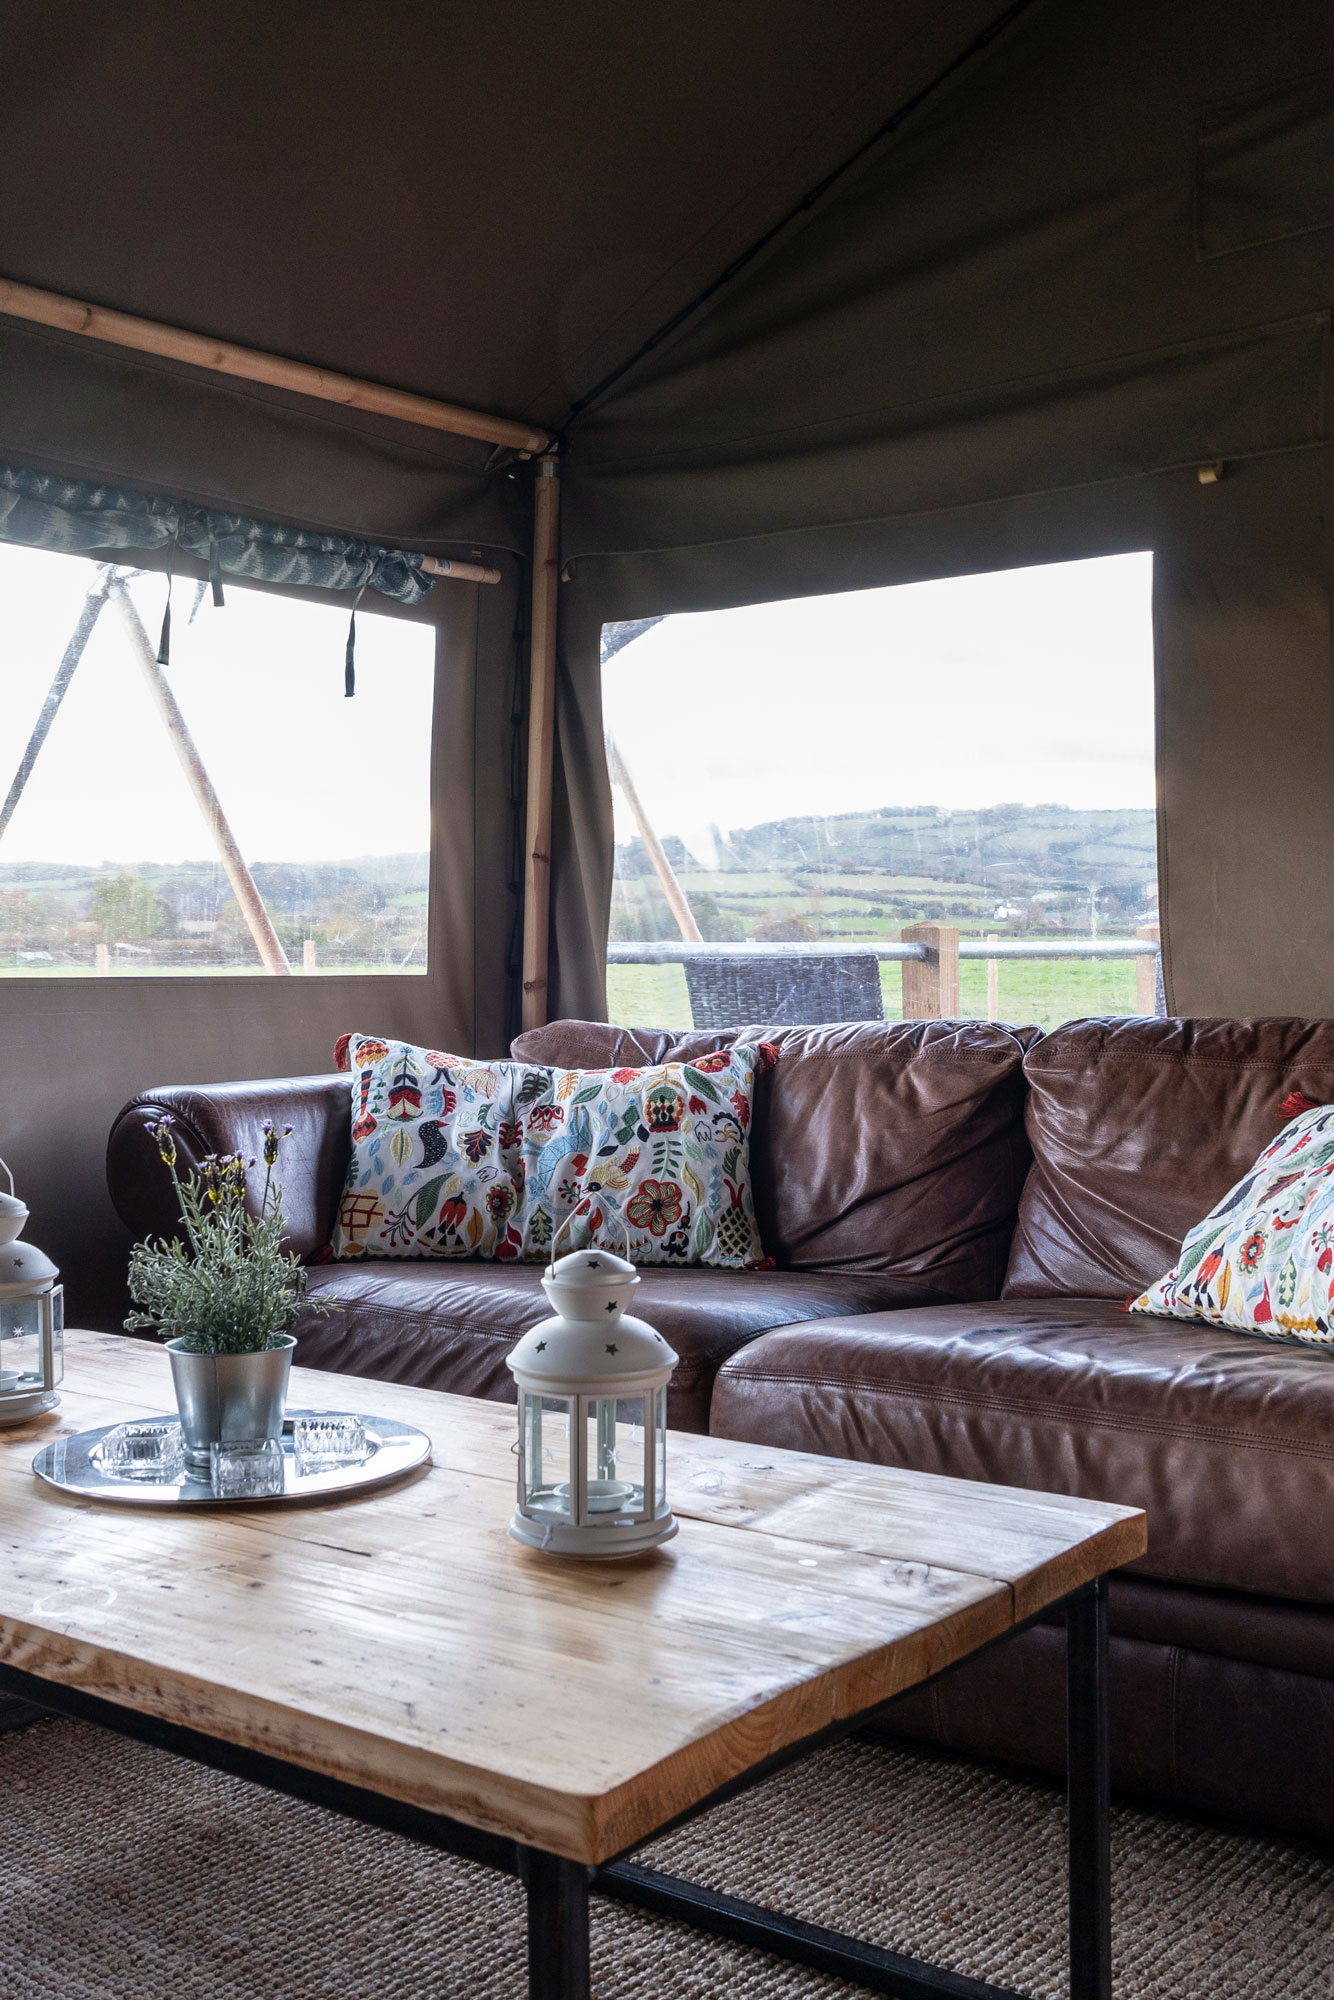 Middlestone Farm – Glamping in the English countryside by Soonafternoon